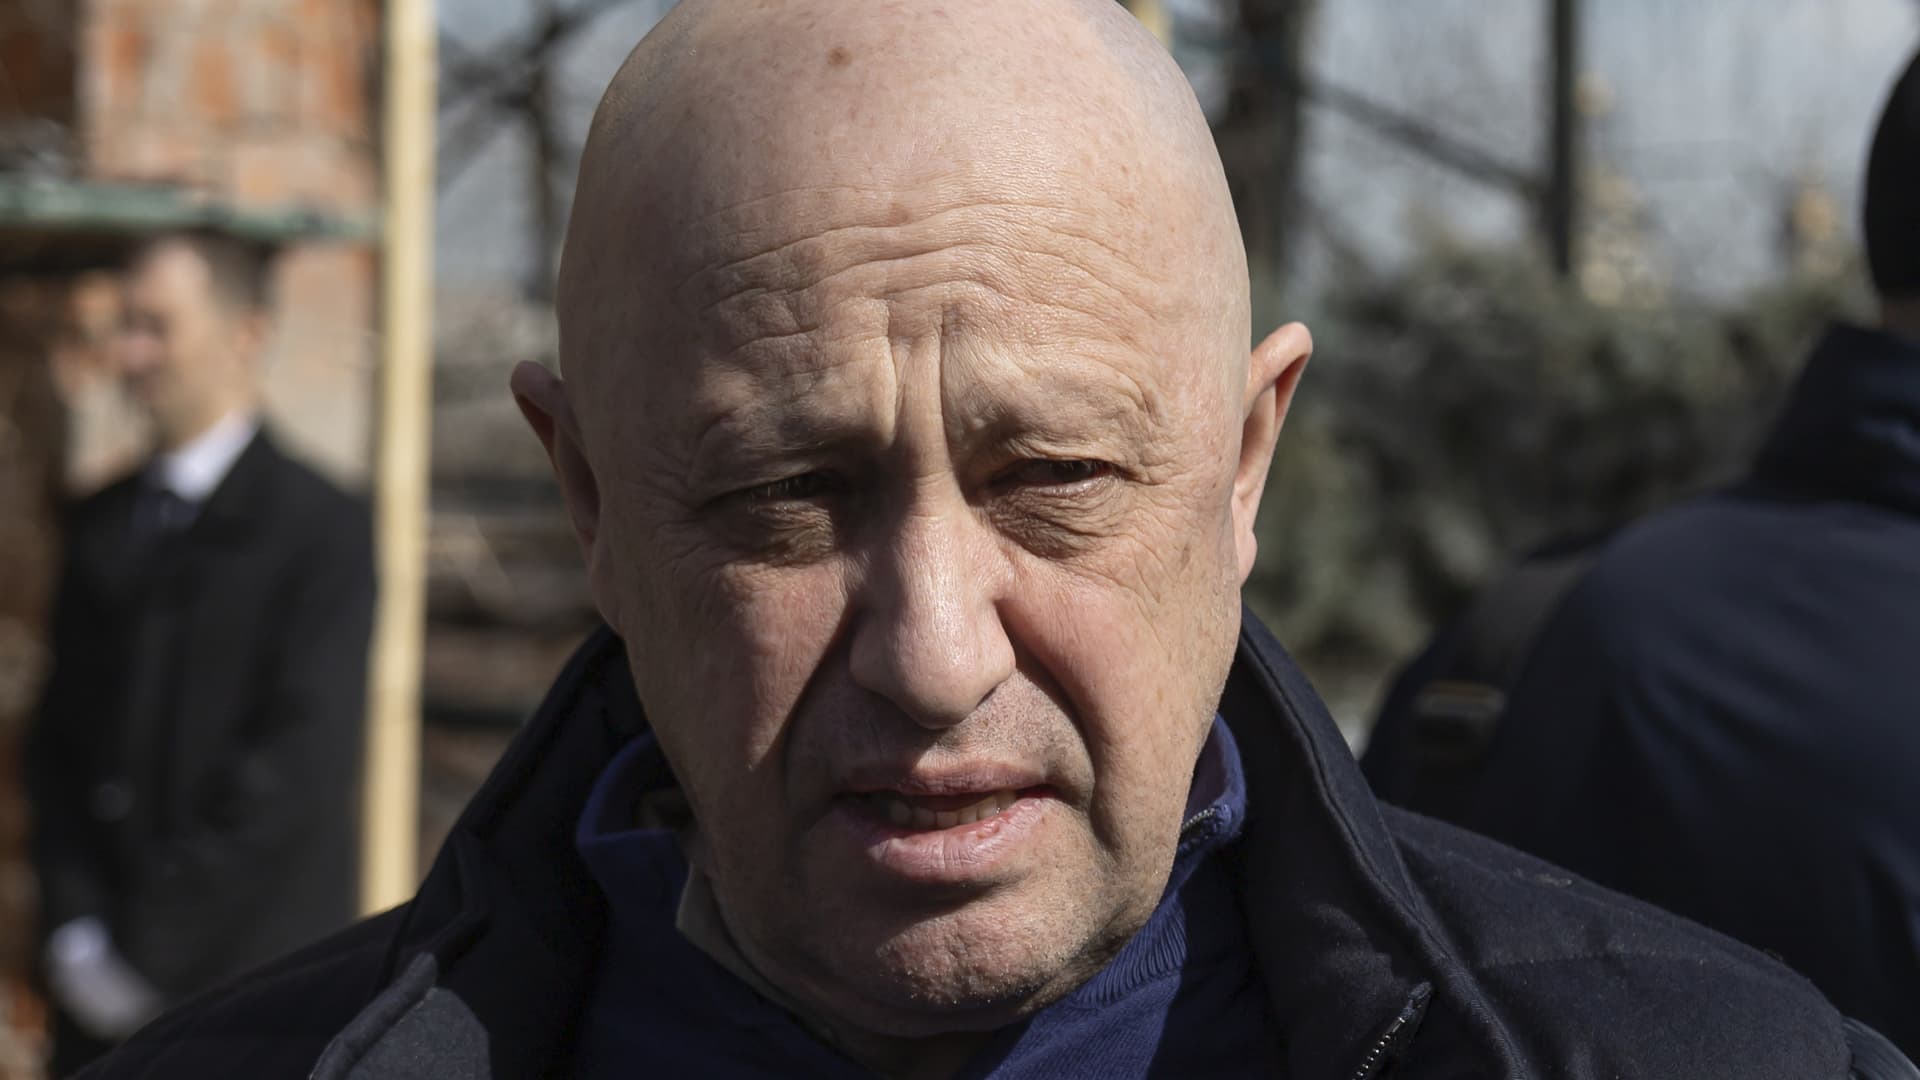 Putin says Prigozhin ‘made serious mistakes’ in first remarks since plane crash that likely killed the Wagner boss